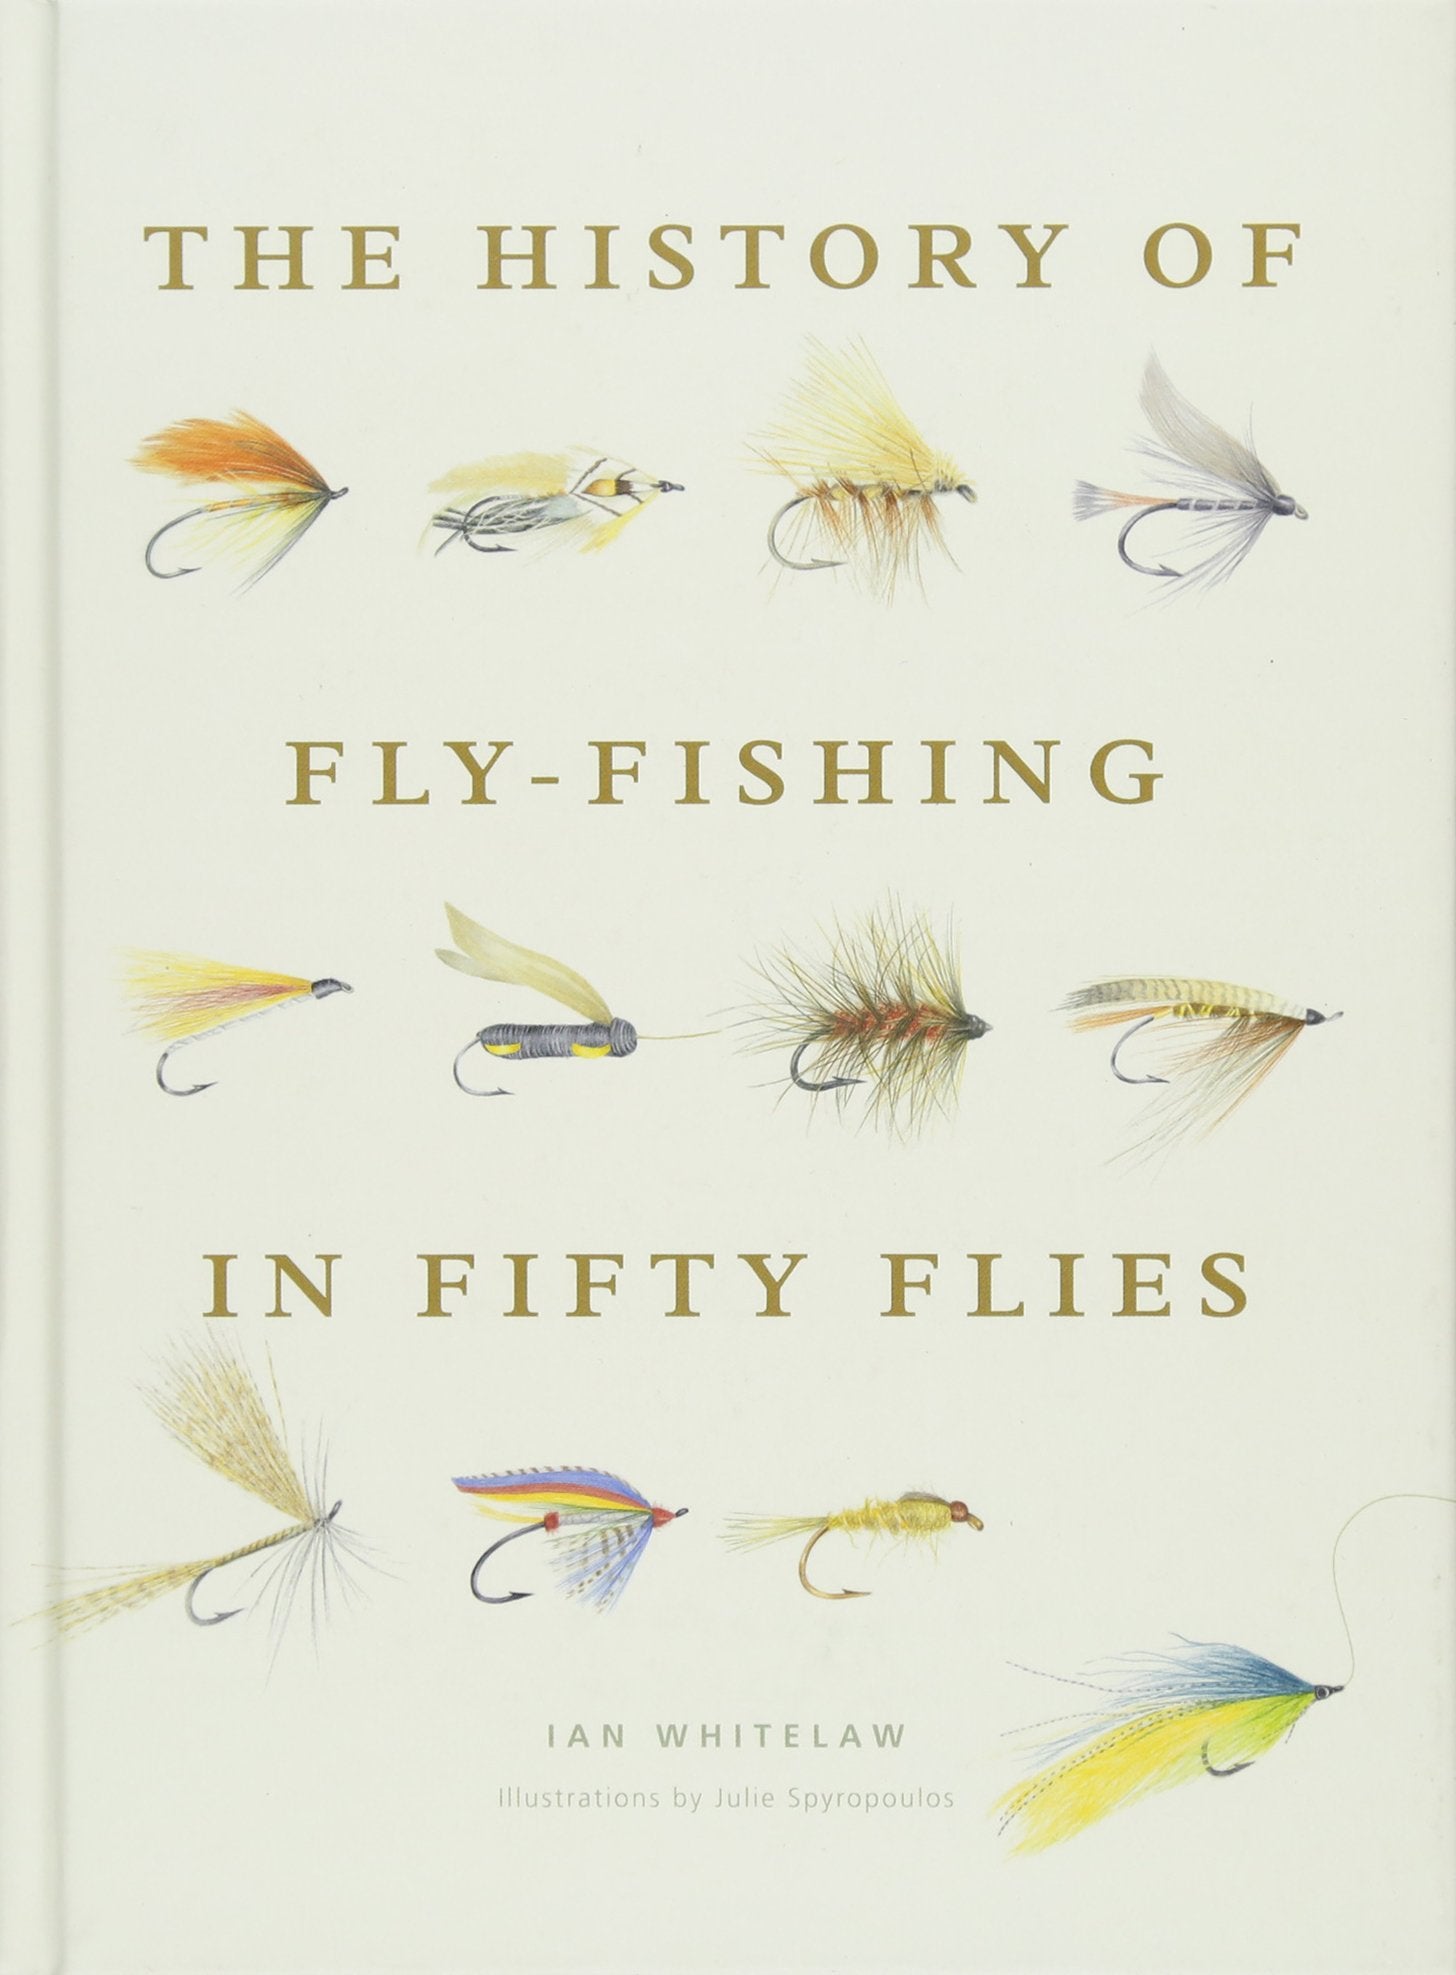 The History of Fly Fishing